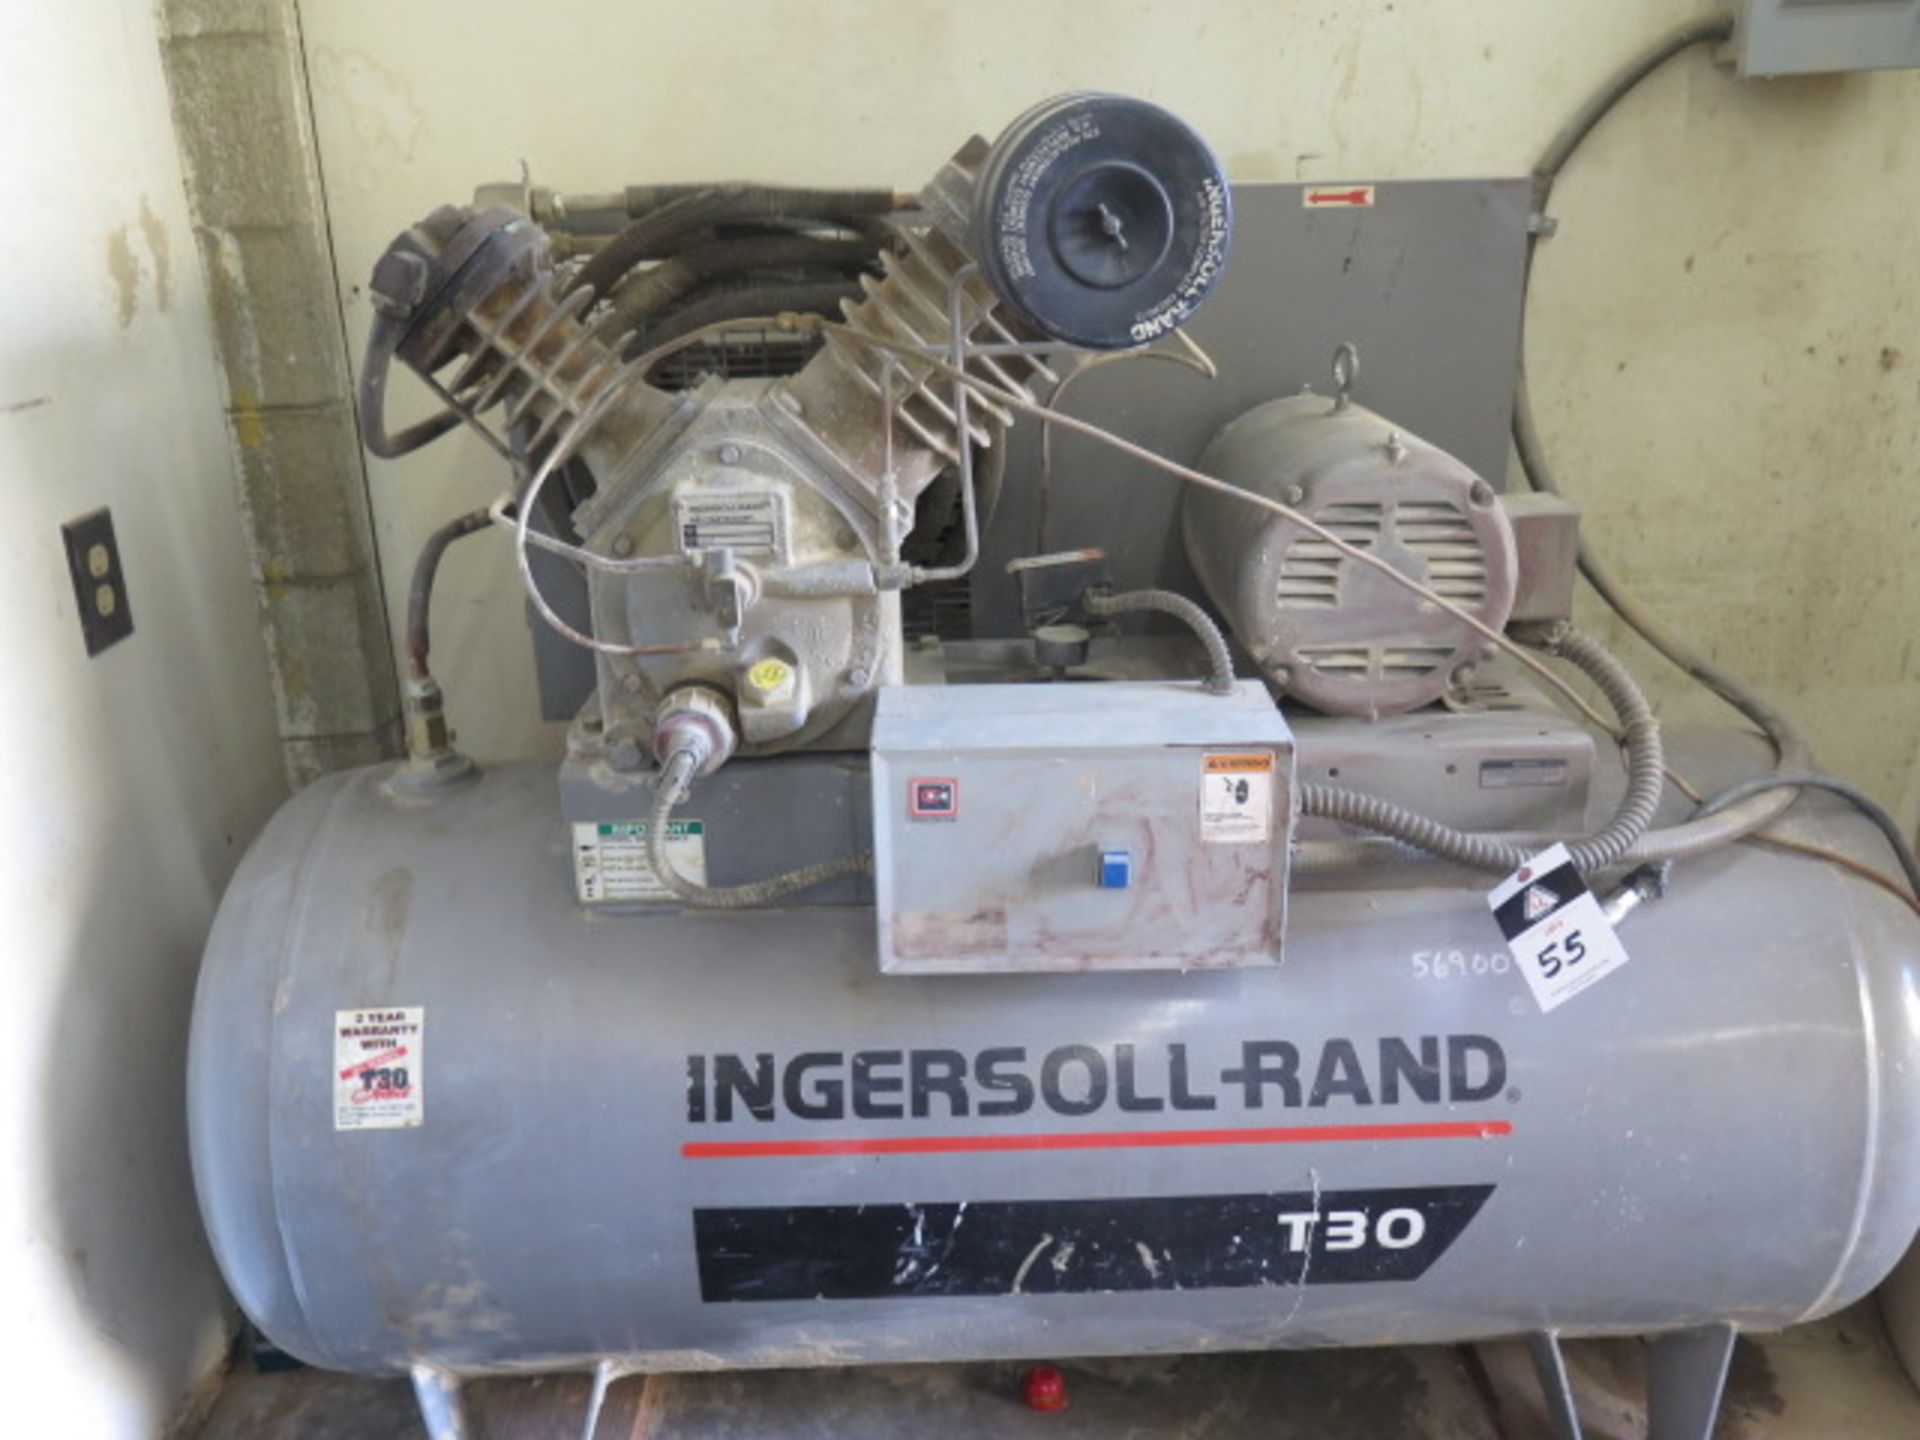 Ingersoll Rand T30 10/7.5Hp Horizontal Air Compressor w/ 2-Stage Pump, 80 Gallon SOLD AS IS